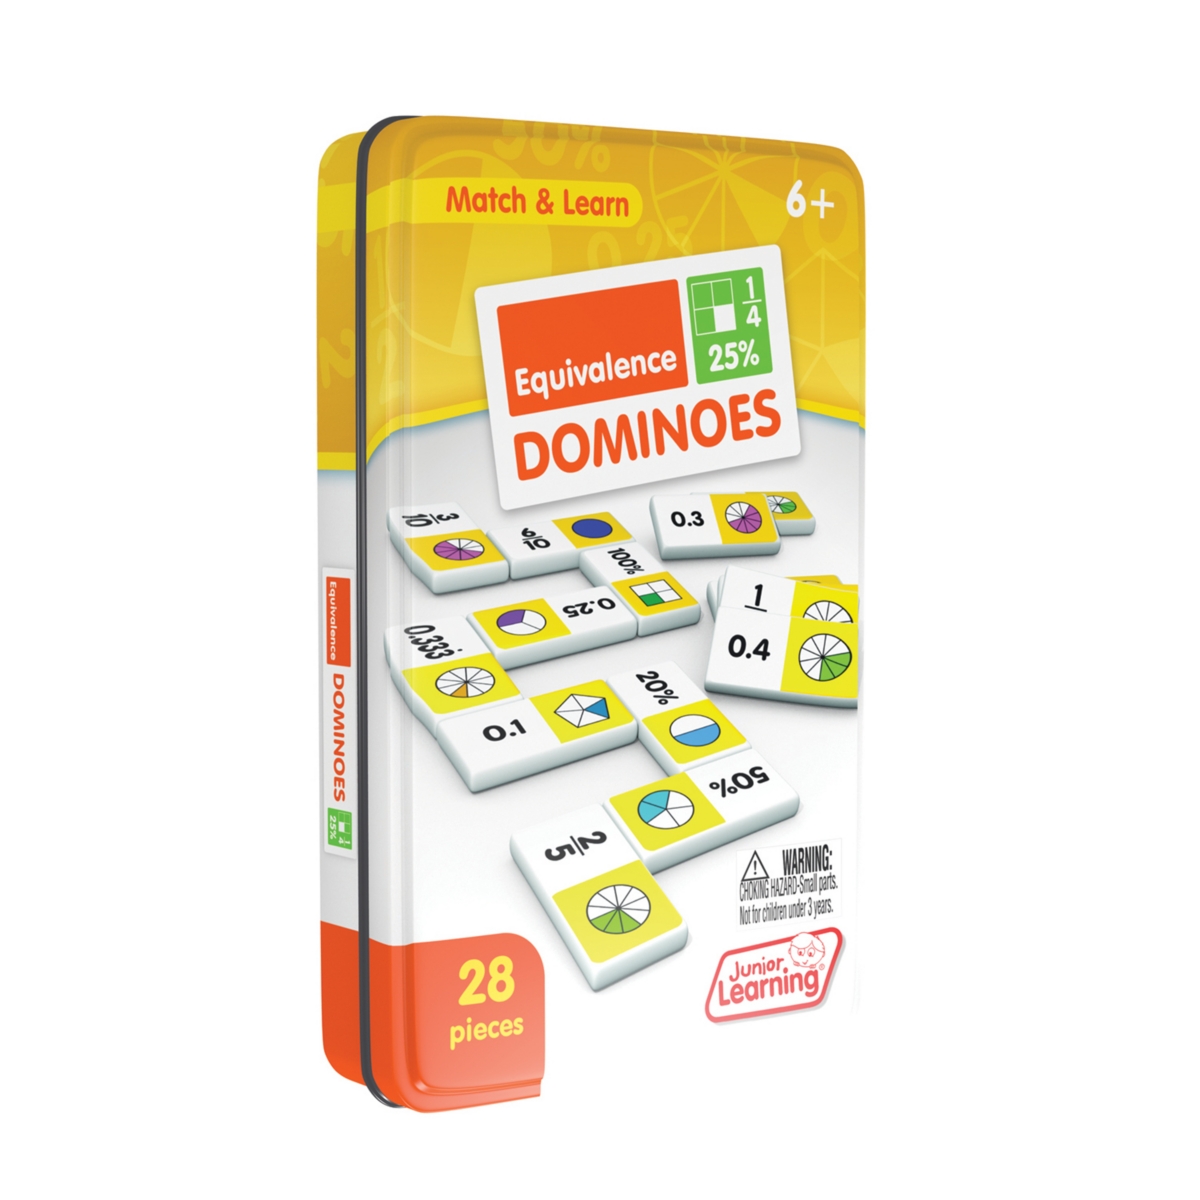 Junior Learning Kids' Equivalence Dominoes Match And Learn Educational Learning Game In Multi